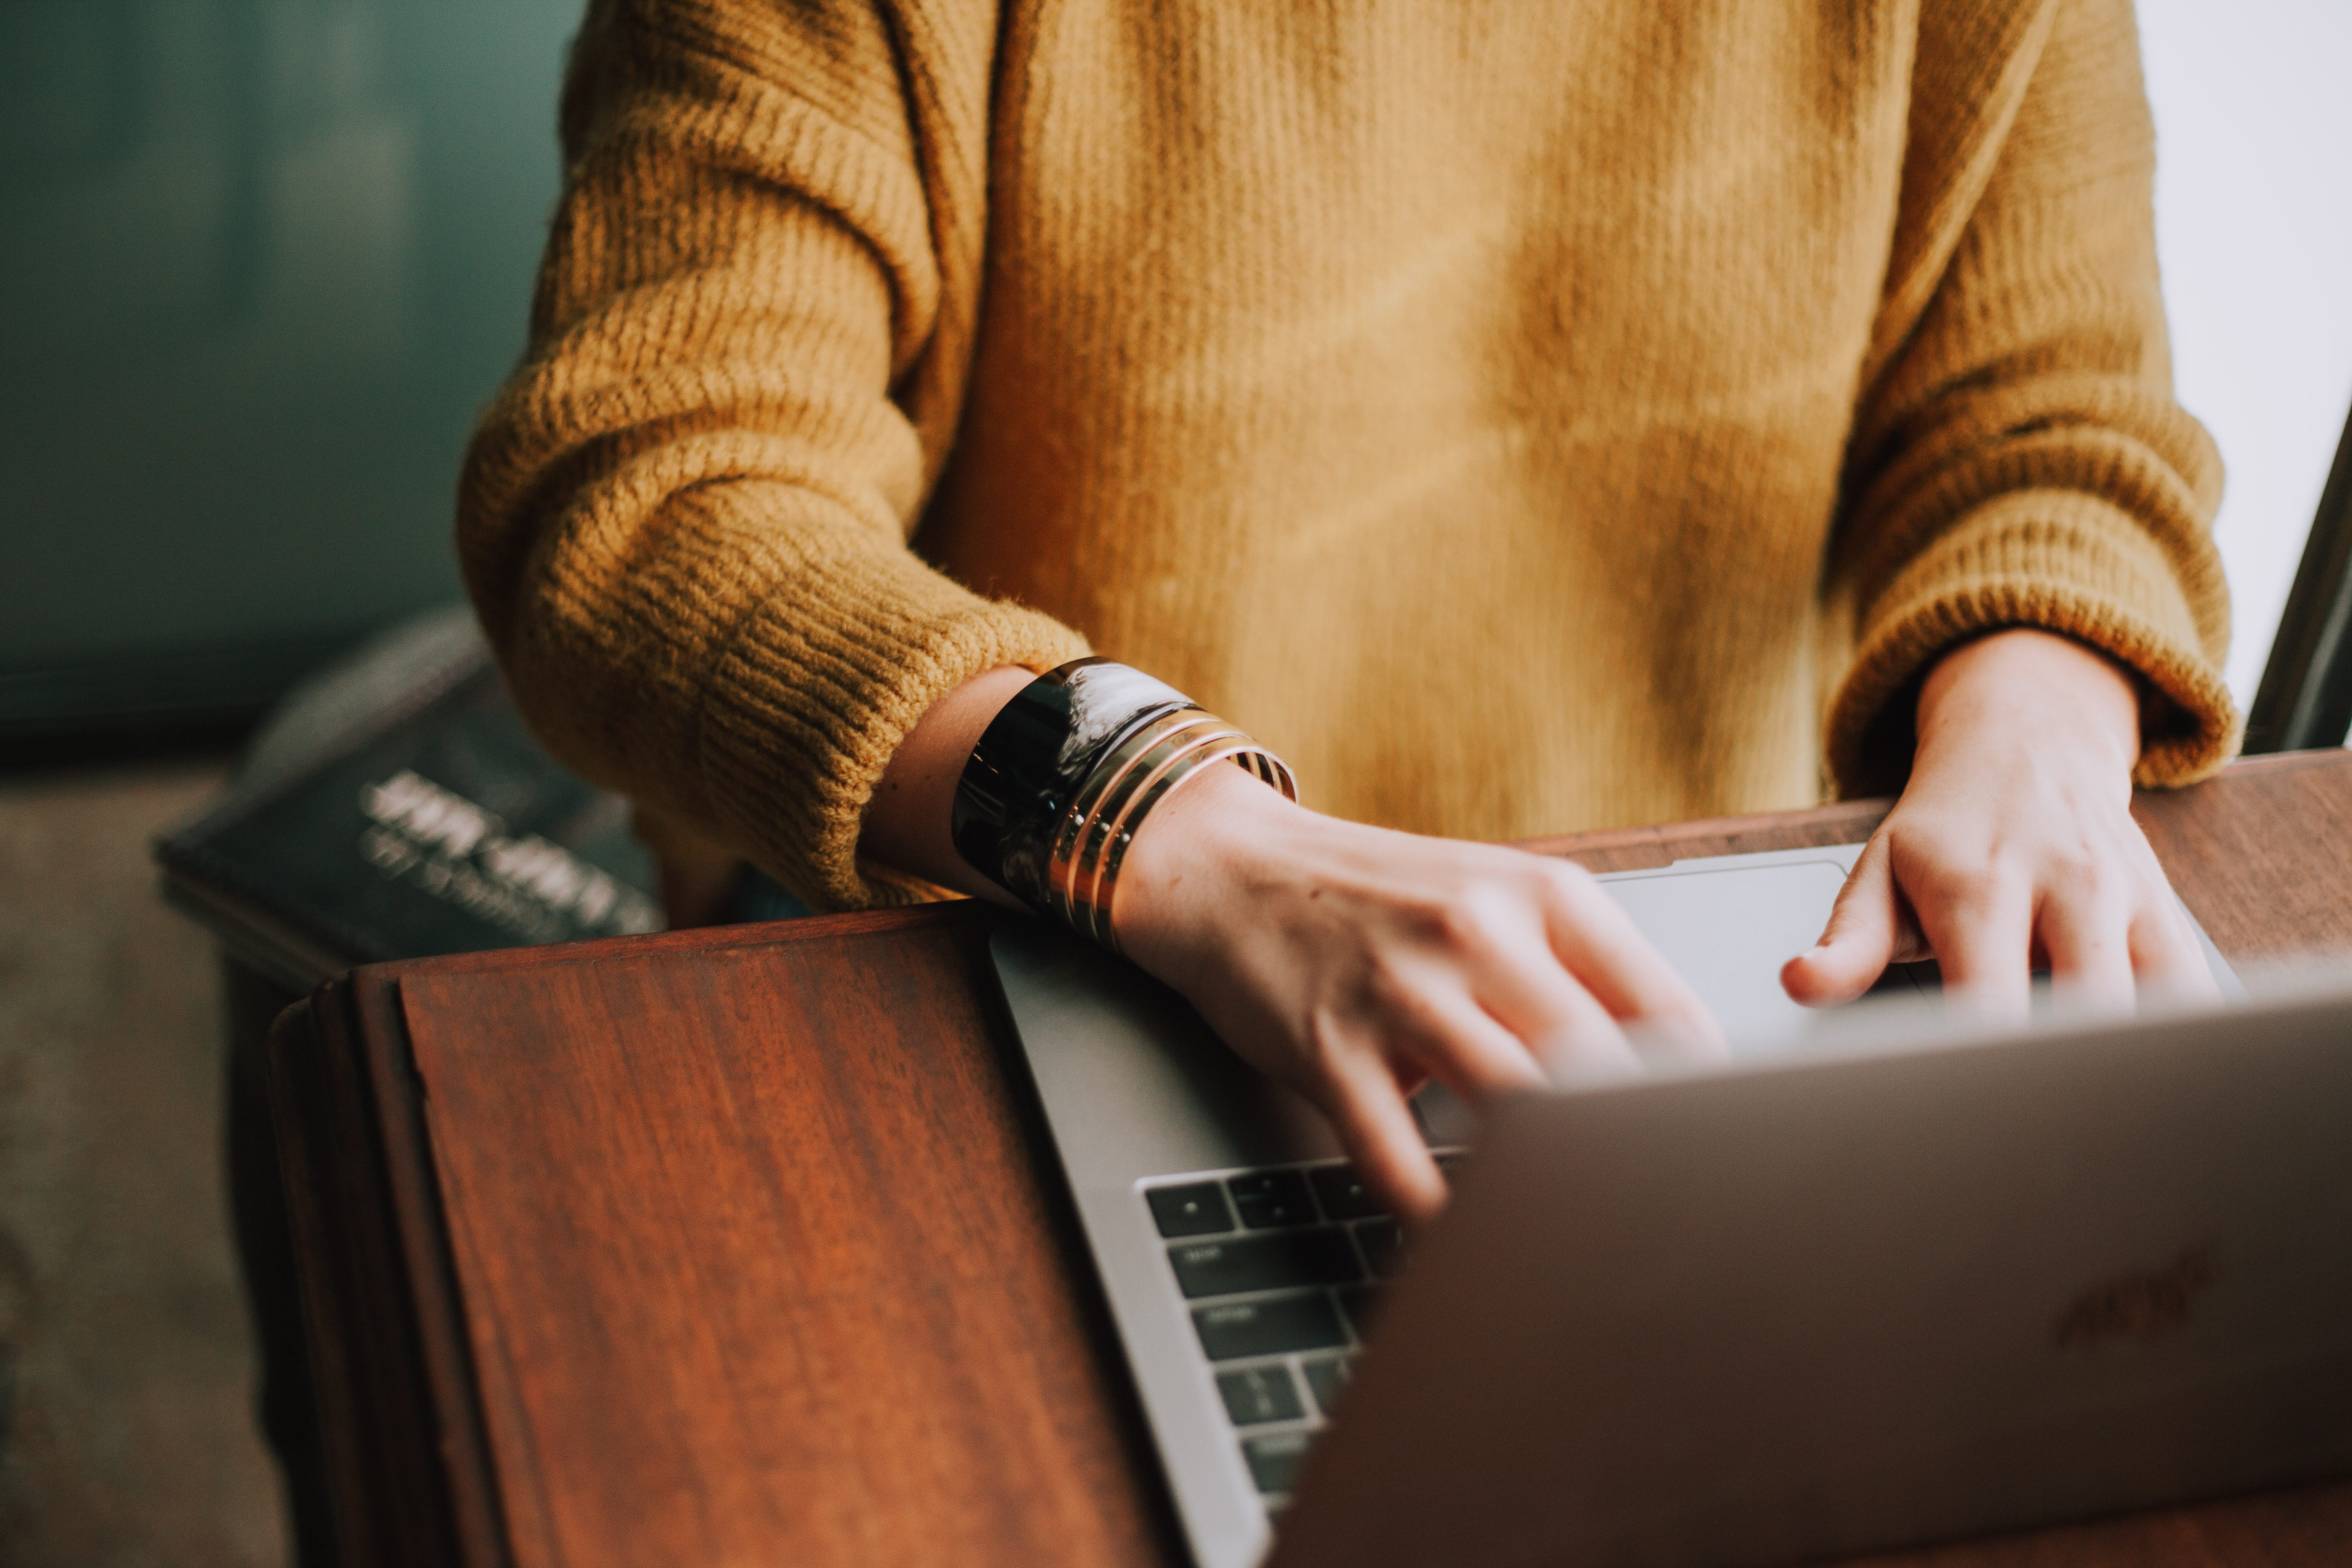 Person in gold sweater using laptop; image by Cristin Hume, via Unsplash.com.